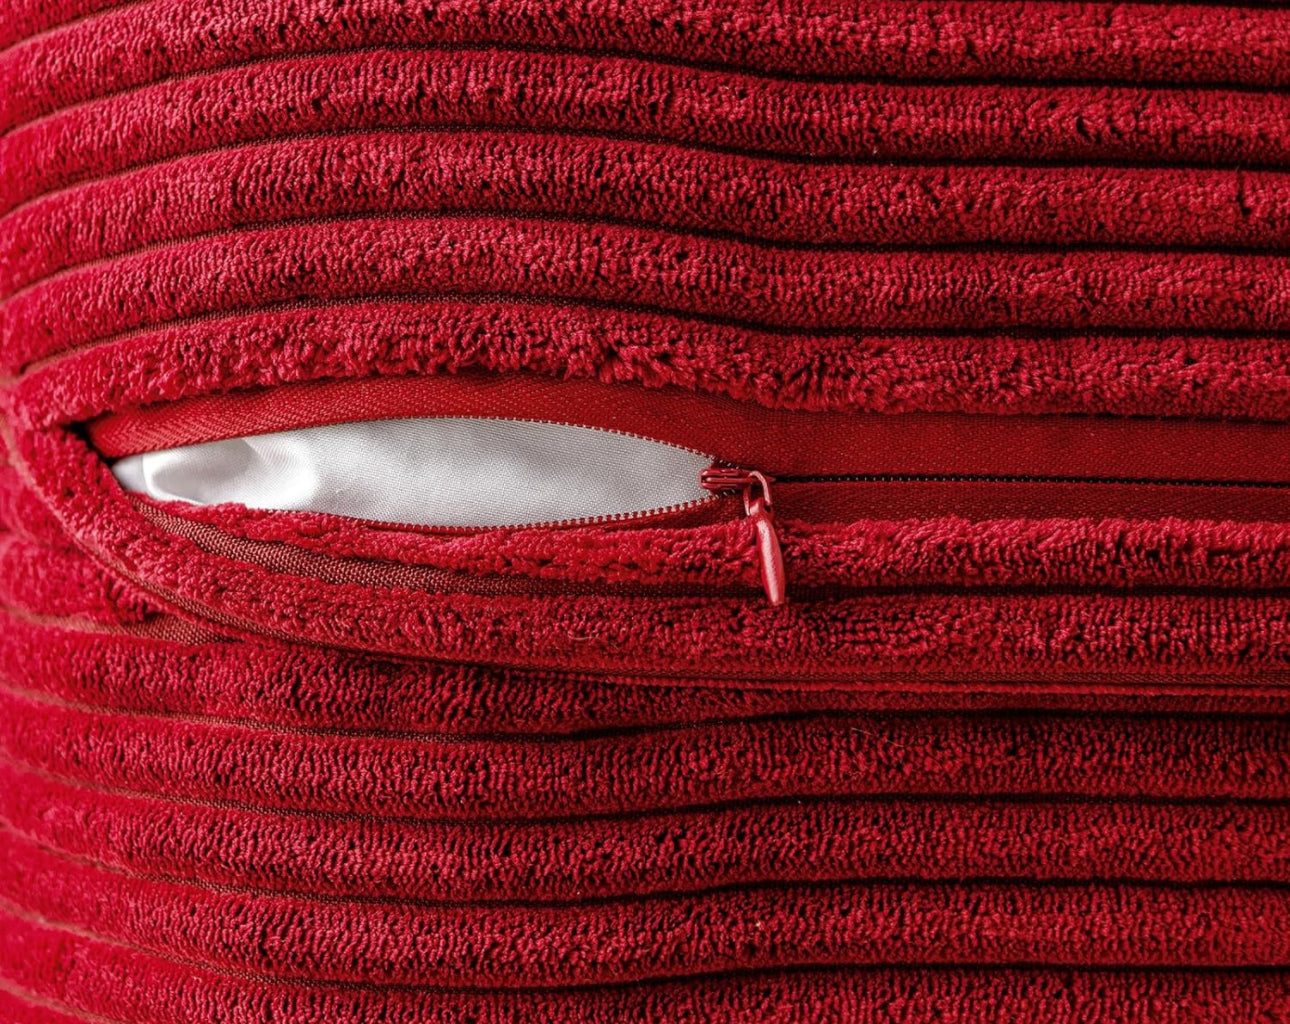 MIULEE Red Corduroy Pillow Covers with Splicing Set of 2 Super Soft Boho Striped Pillow Covers 16”x16”